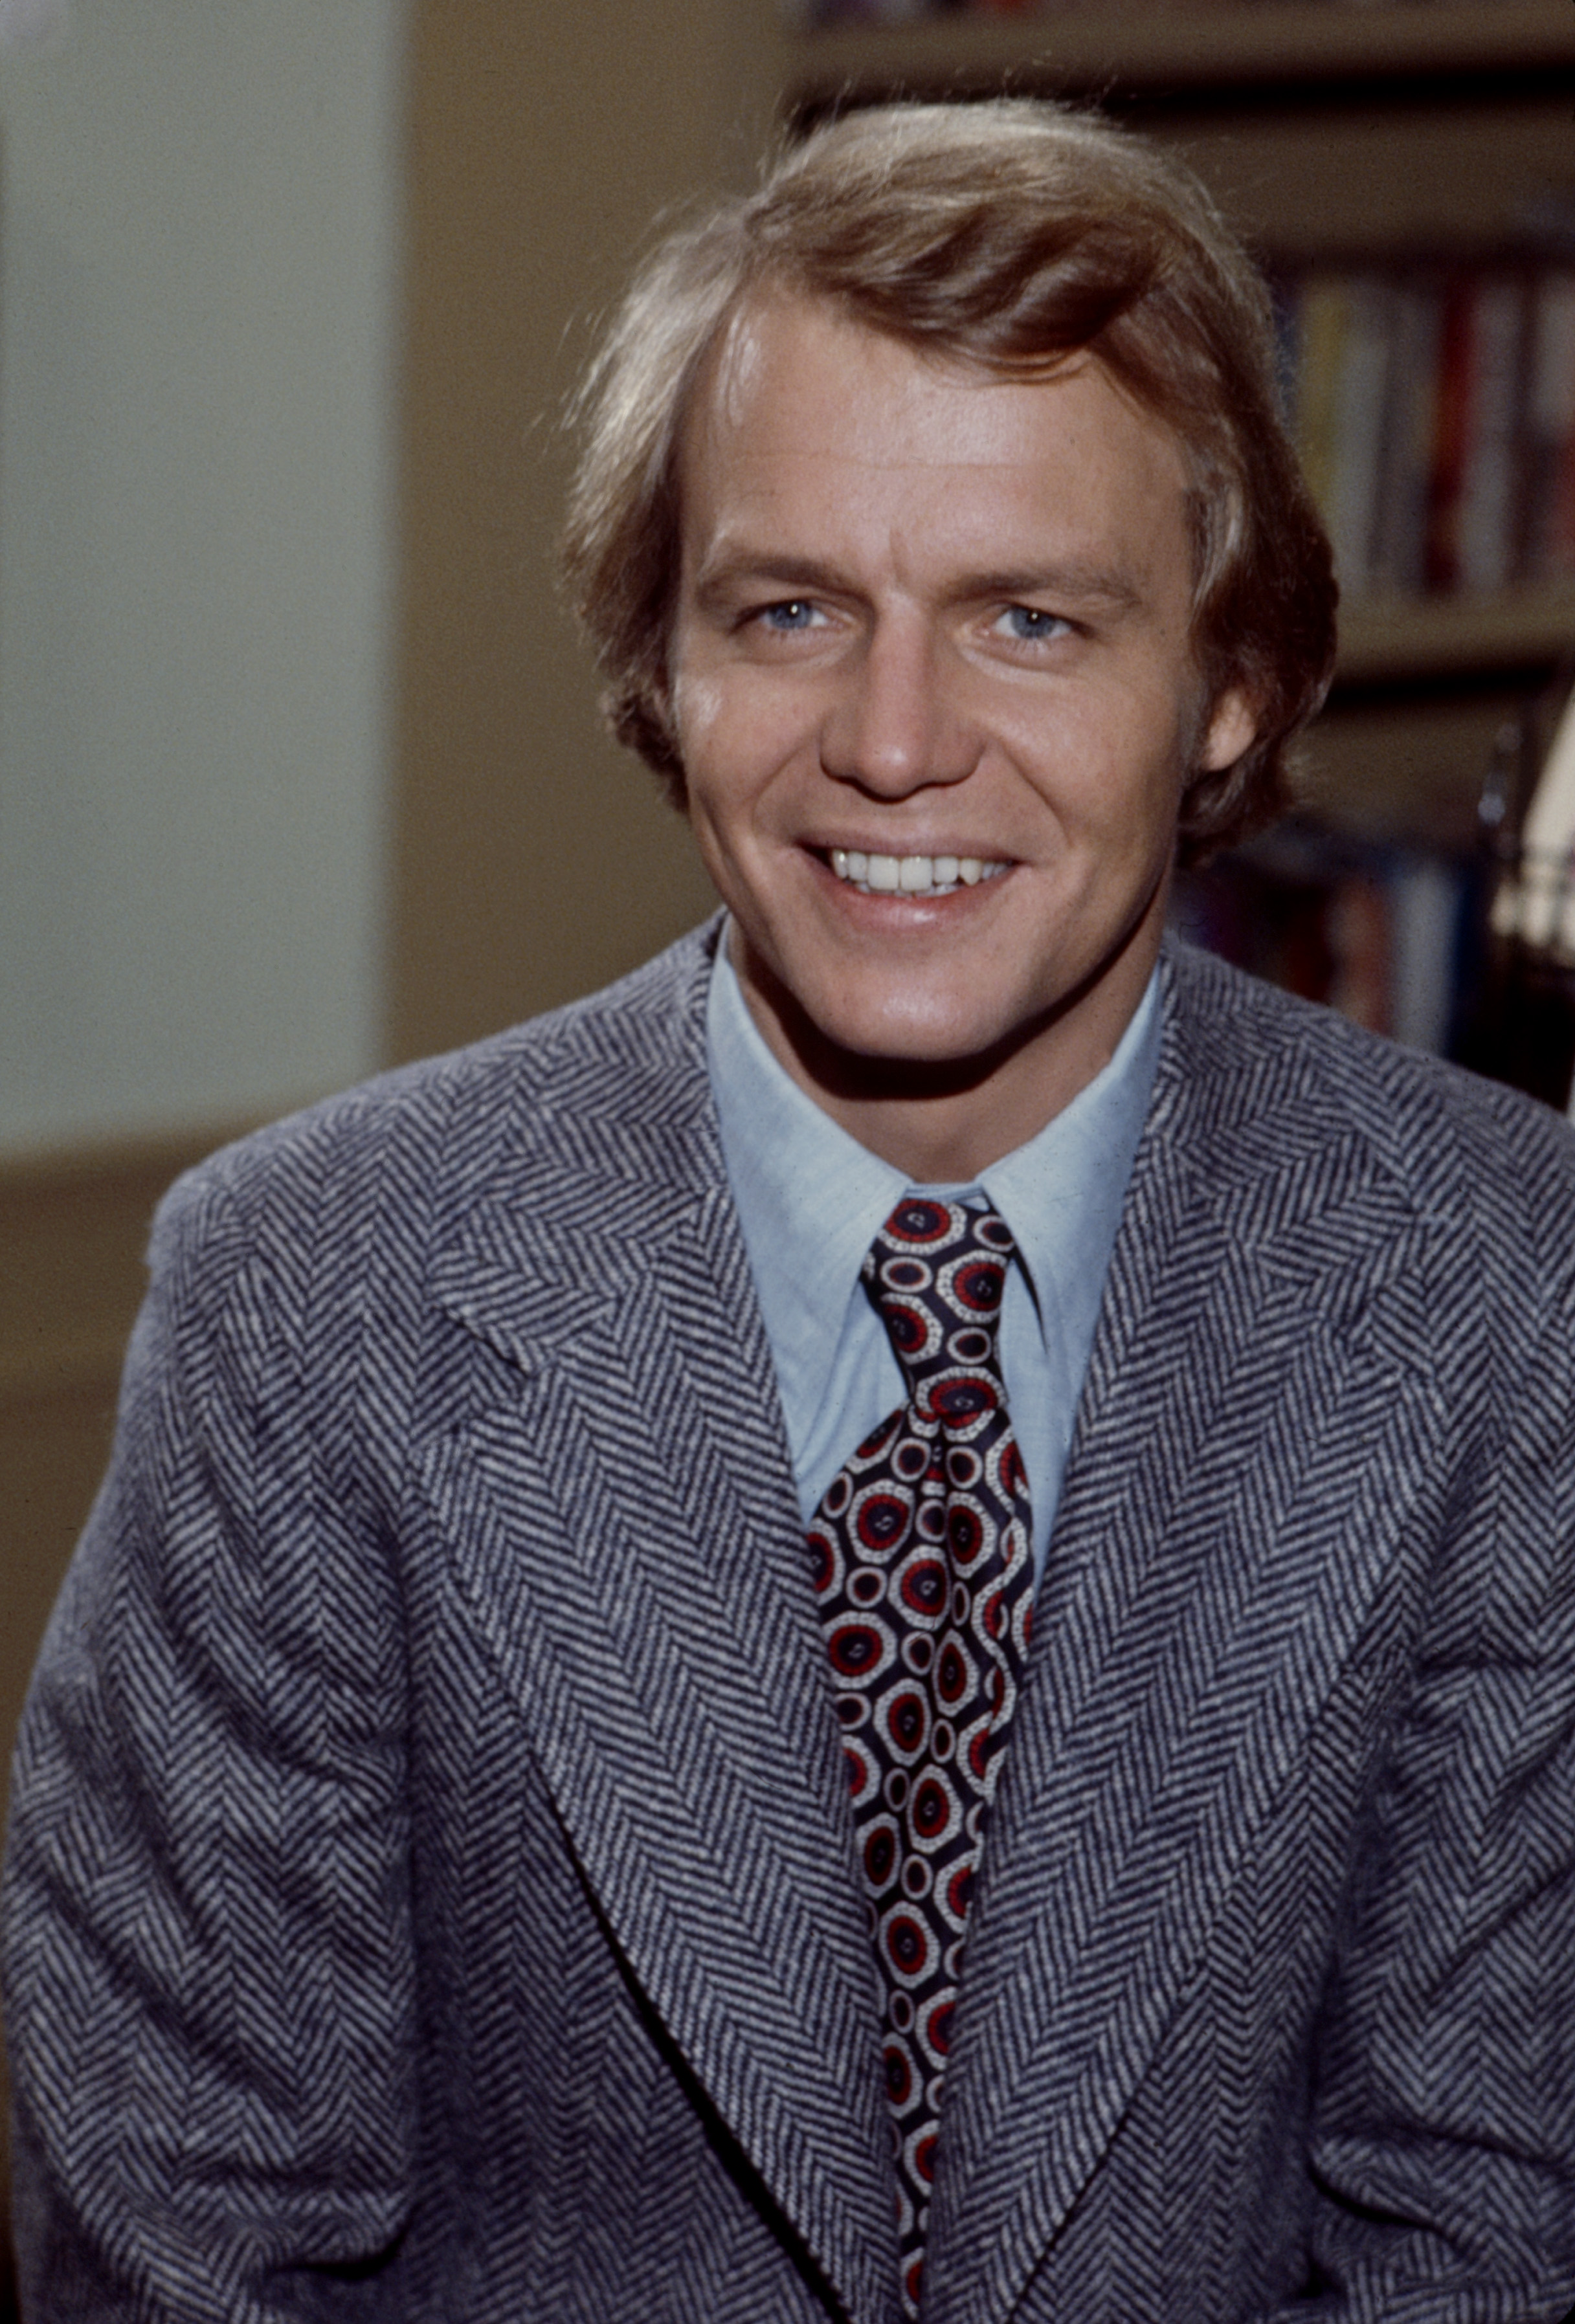 David Soul in the ABC TV series "Owen Marshall, Counselor at Law" | Source: Getty Images